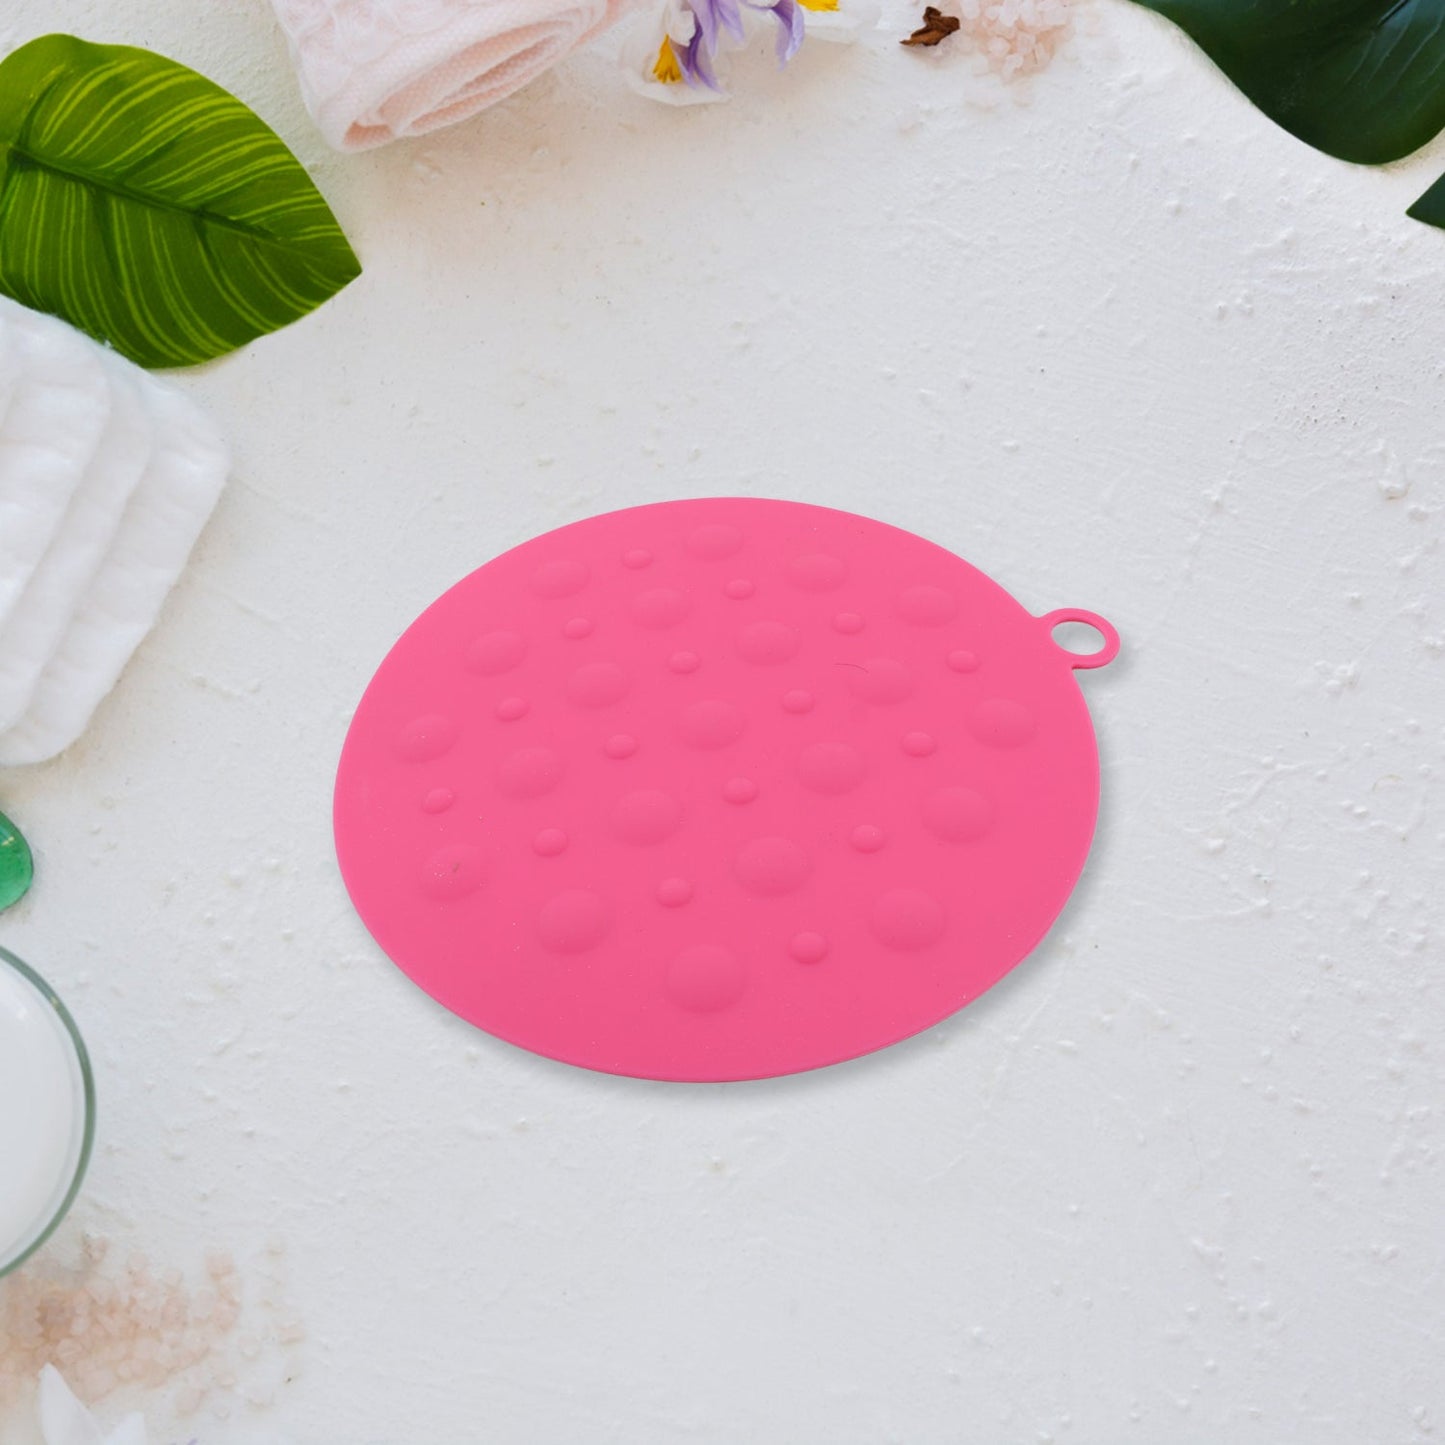 5851 Multifunctional Heat-resistant Non-slip Pot Pad for Home Kitchen Easy To Clean, Home Silicone Dining Table/Kitchen Mats Heat Resistant Pot Holder; Hot Pad Coaster for Utensil, Coffee Cups, Pan, Car etc